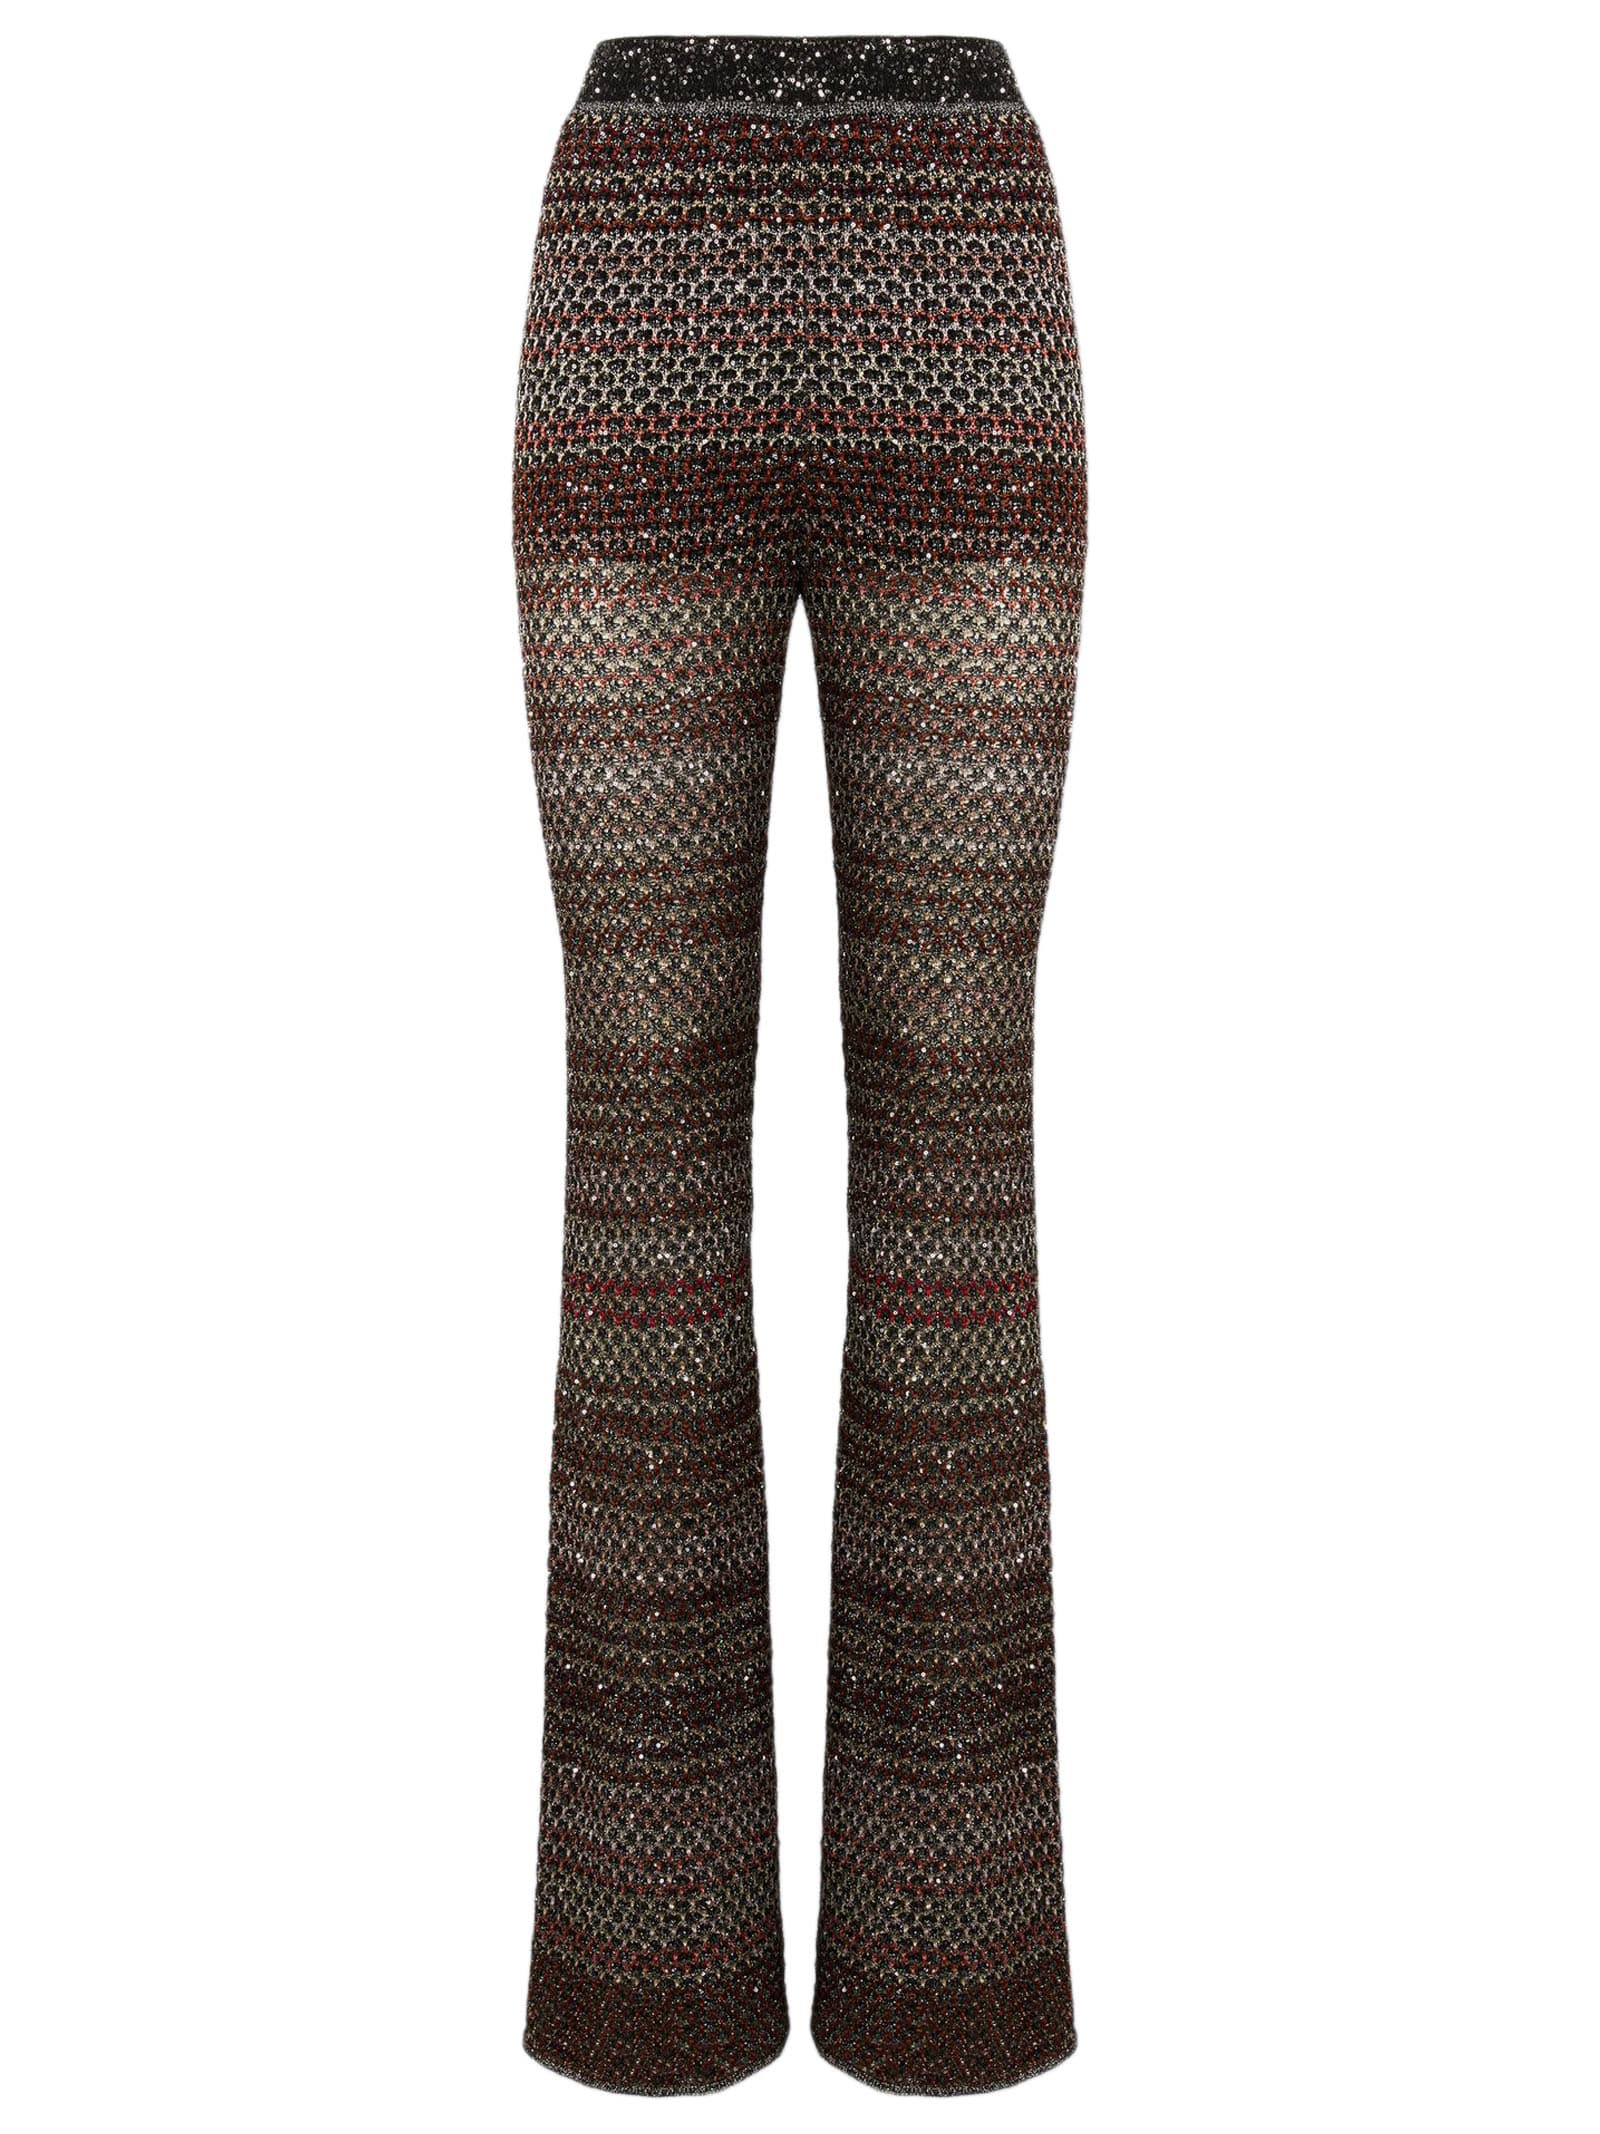 Trousers In Mesh Knit With Sequin Appliqué